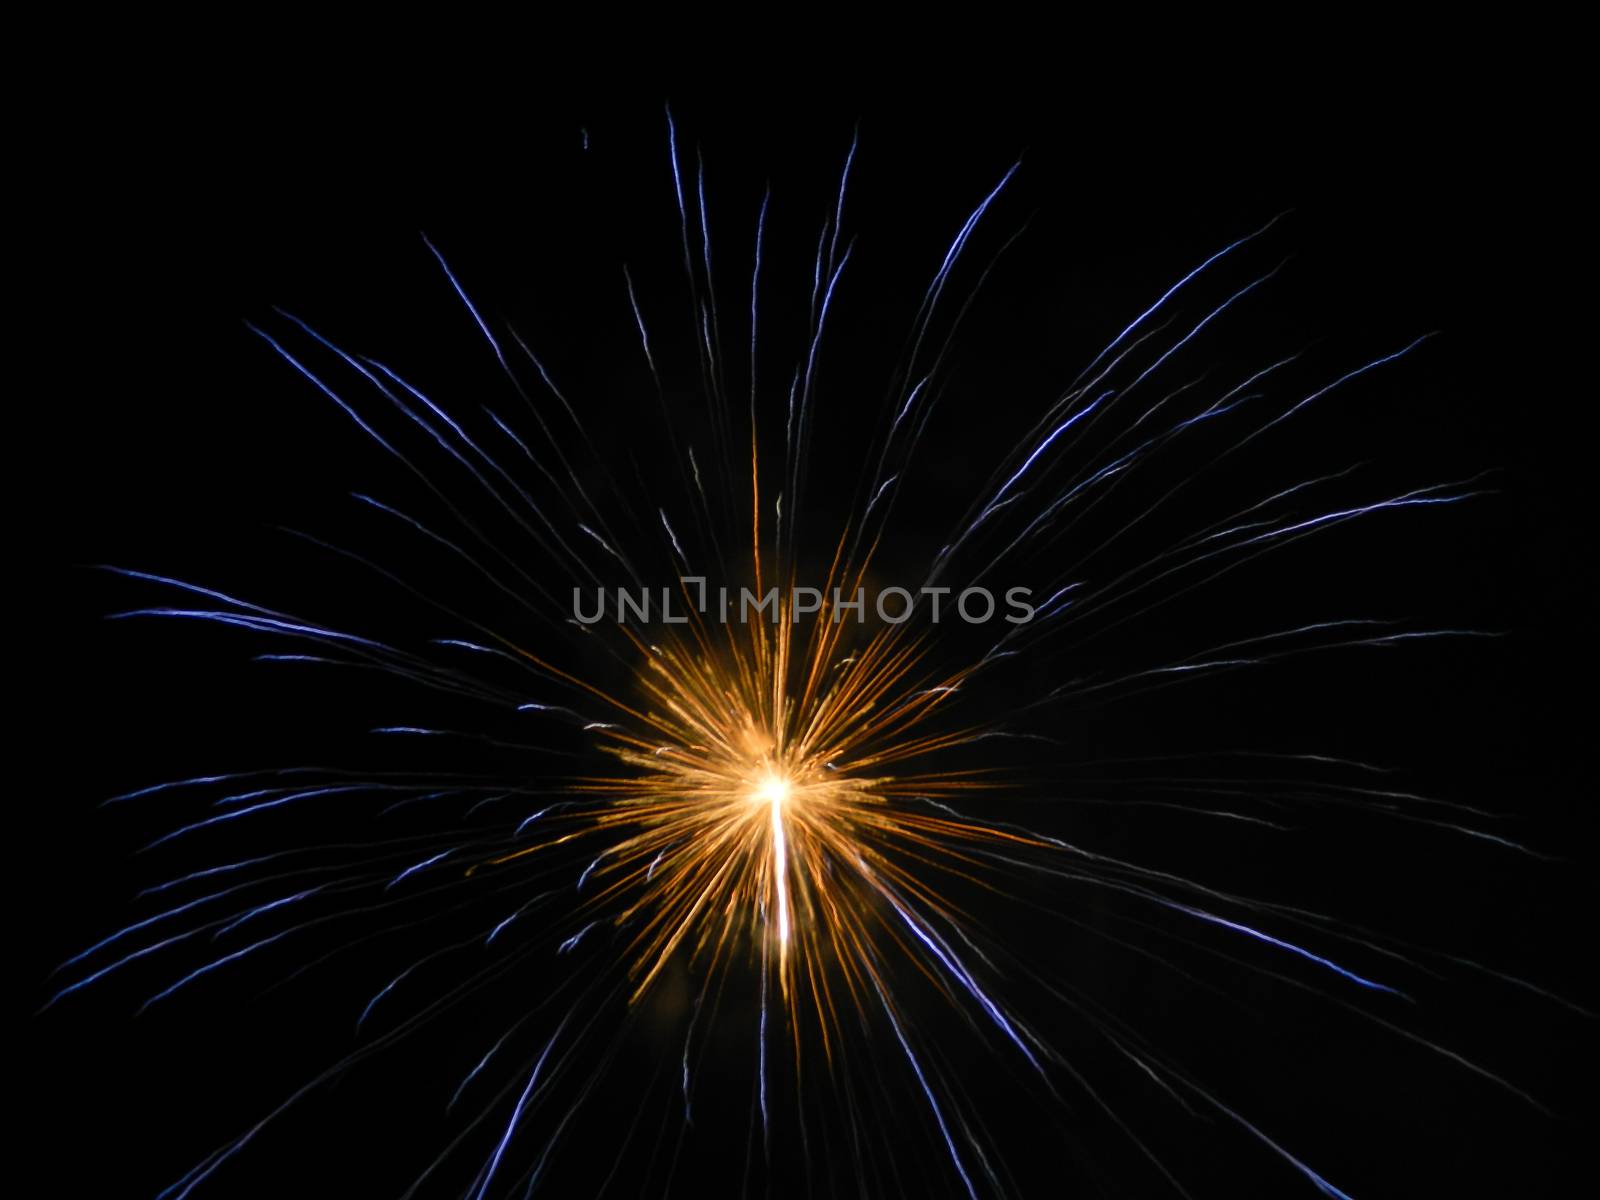 Isolated Fireworks in Venice - Italy